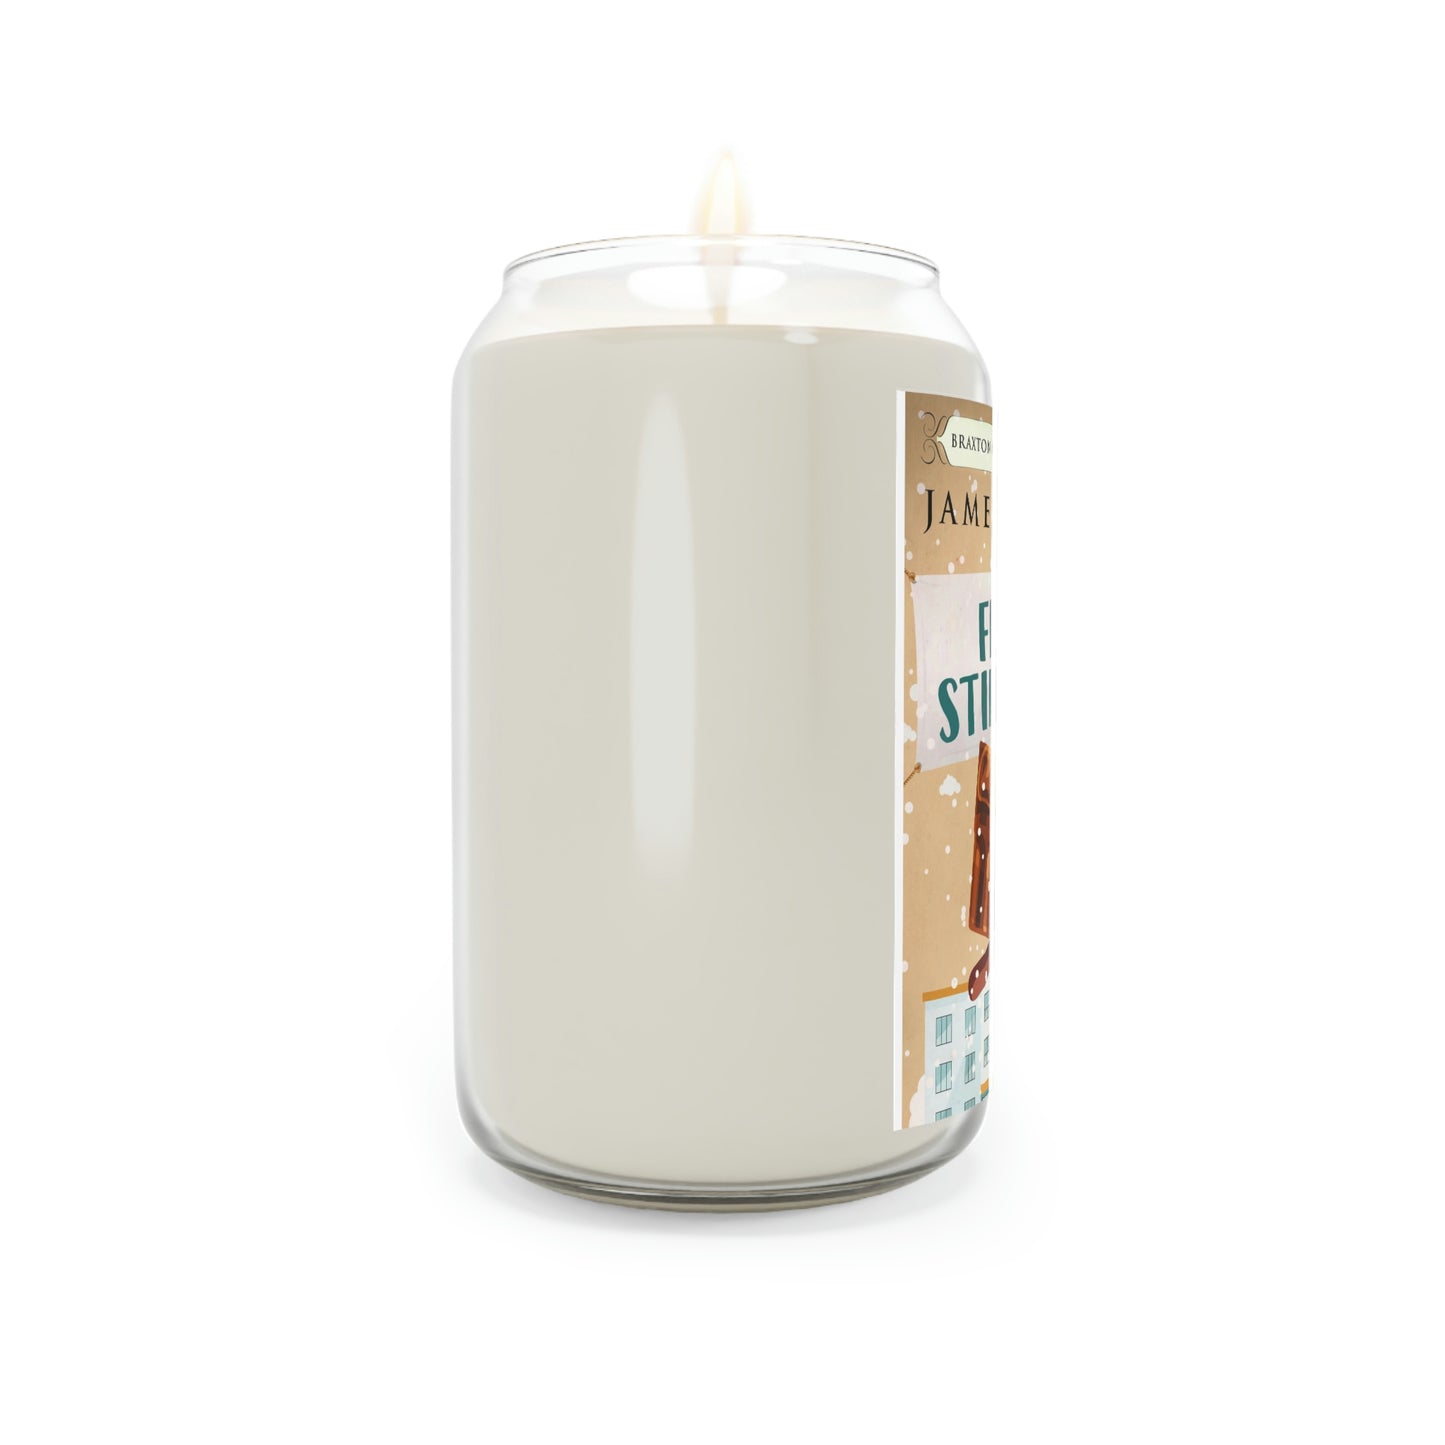 Frozen Stiff Drink - Scented Candle